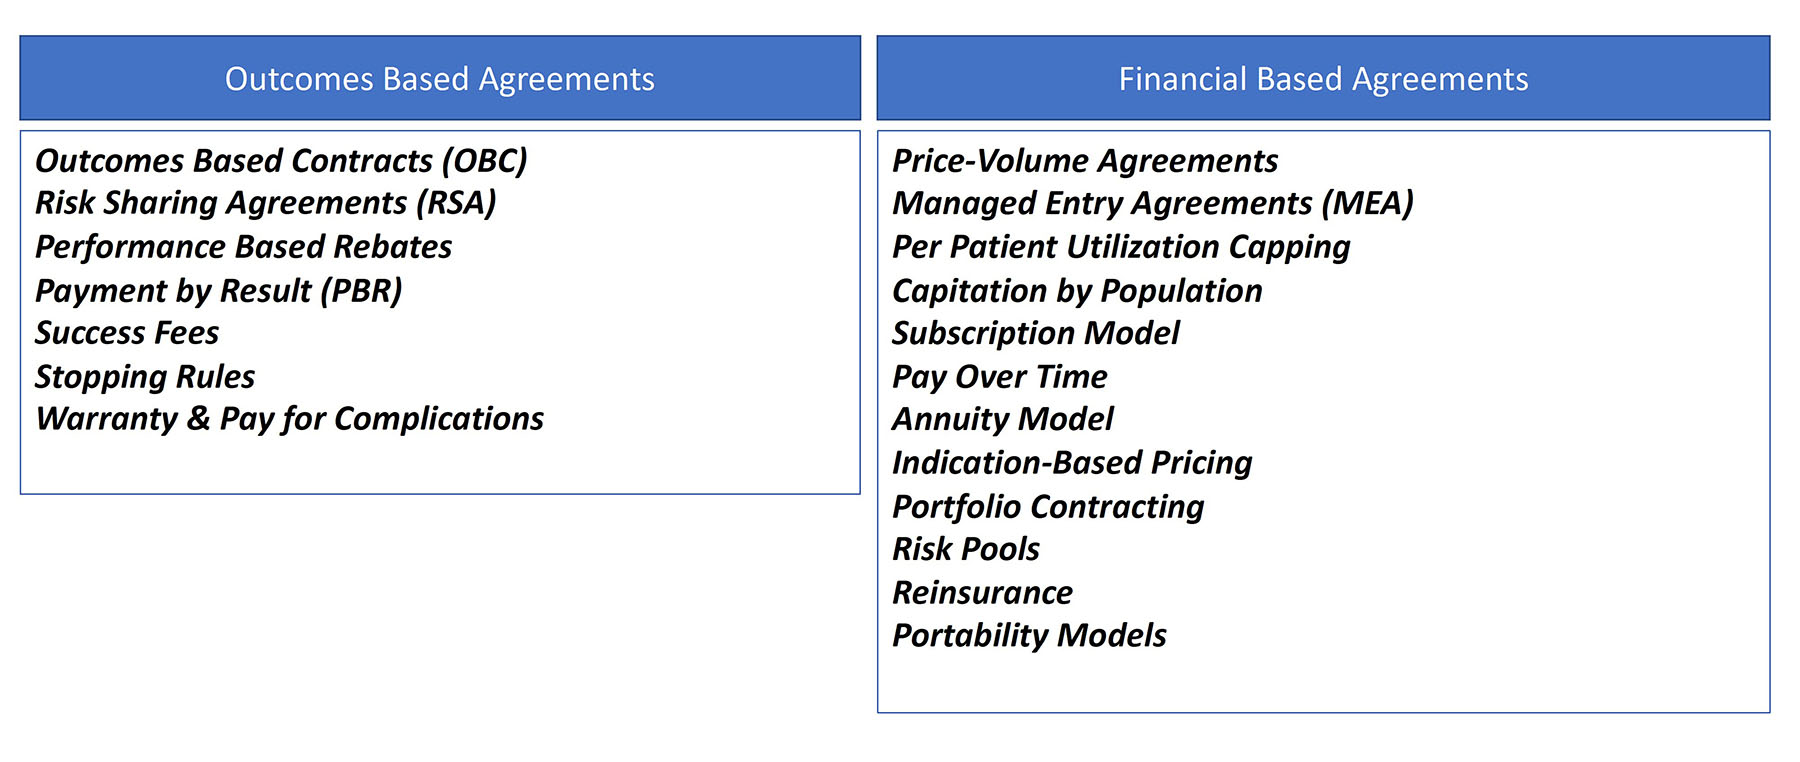 Two boxes, one labeled Outcomes Based Agreements, which includes a list of examples such as outcomes based contracts, risk sharing agreements, performance based rebates, payment by result, success fees, stopping rules, and warranty & pay for complications. The other box is labeled Financial Based Agreements, and includes a list of examples such as price-volume agreements, managed entry agreements, per patient utilization capping, capitation by population, subscription model, pay over time, annuity model, indication-based pricing, portfolio contracting, risk pools, reinsurance, and portability models 